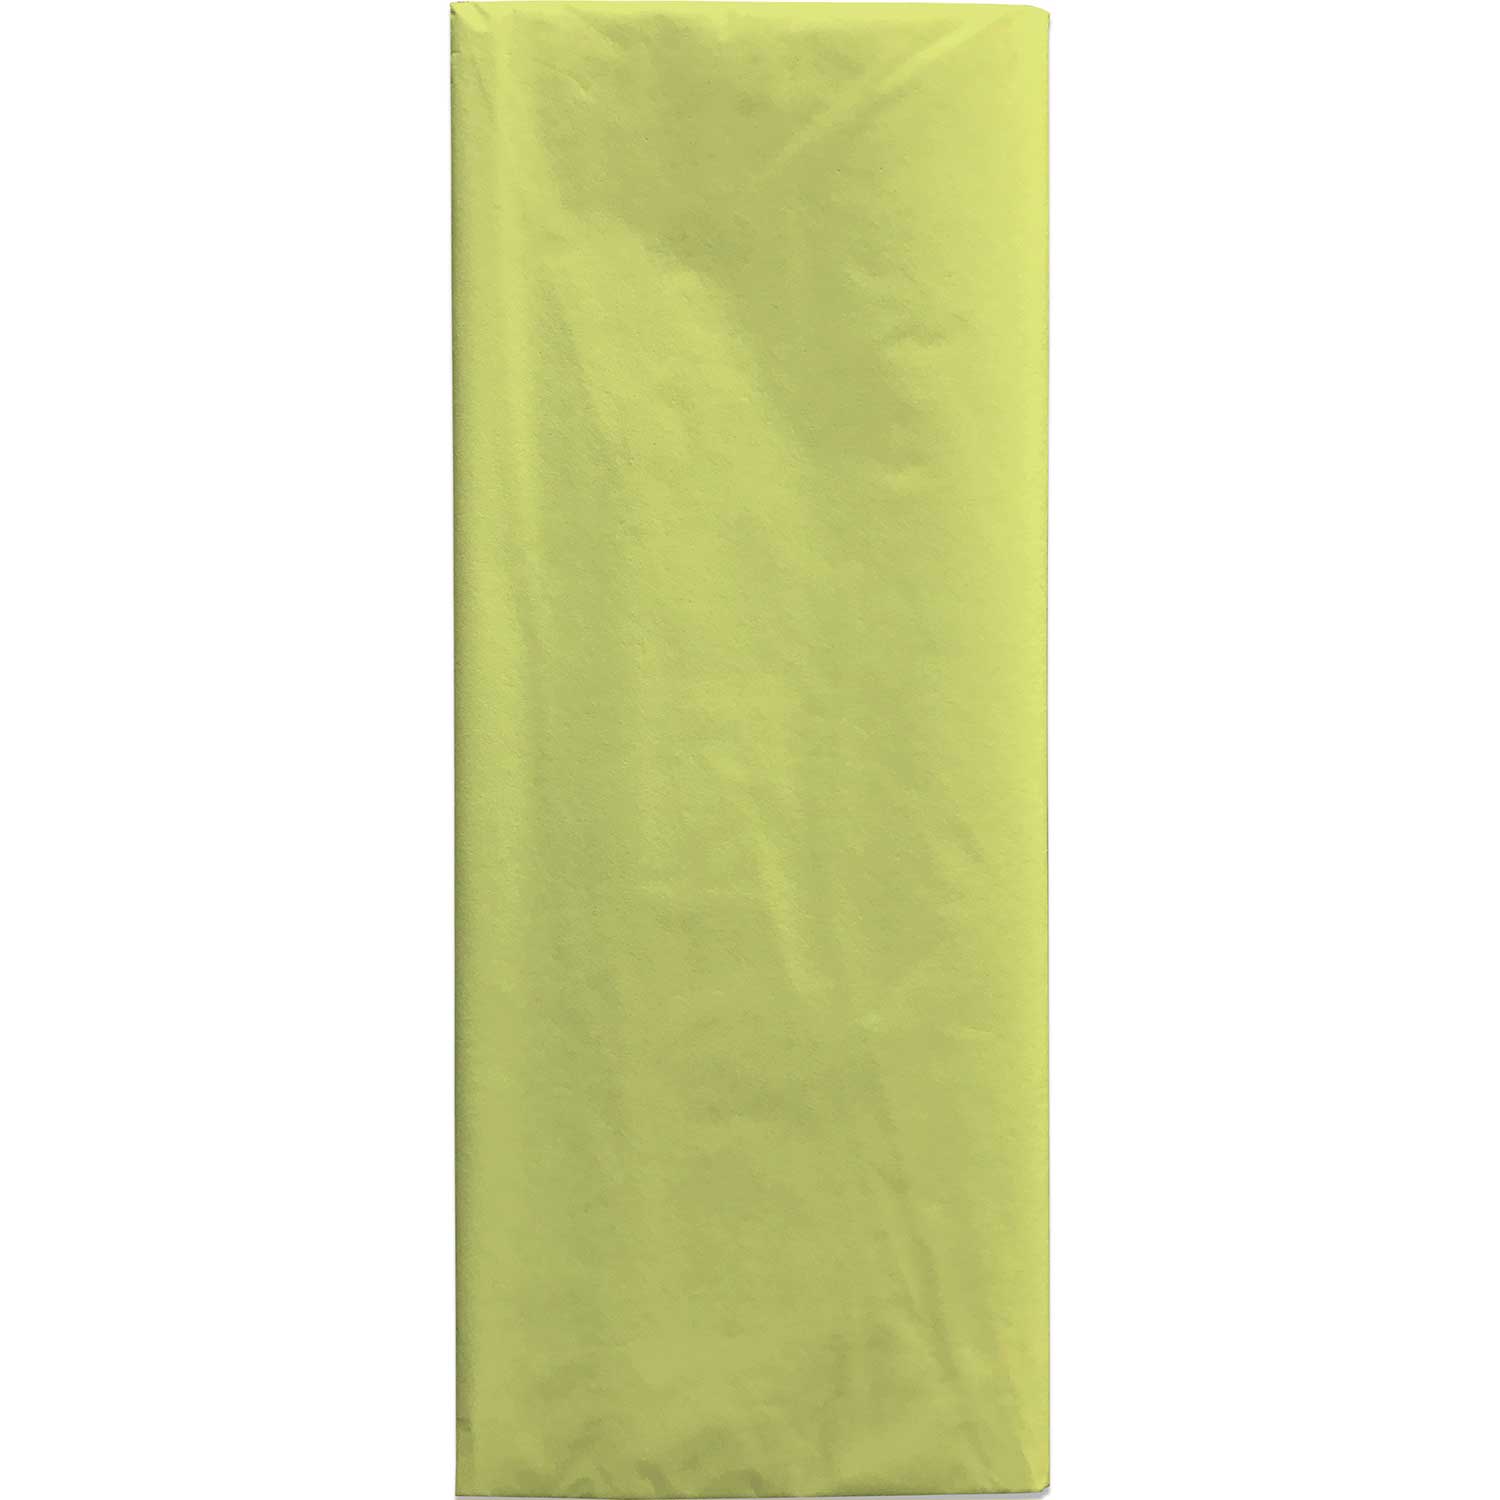 Yellow Tissue Paper LARGE 20x30 Sheets Gift Box Wrapping Tissue